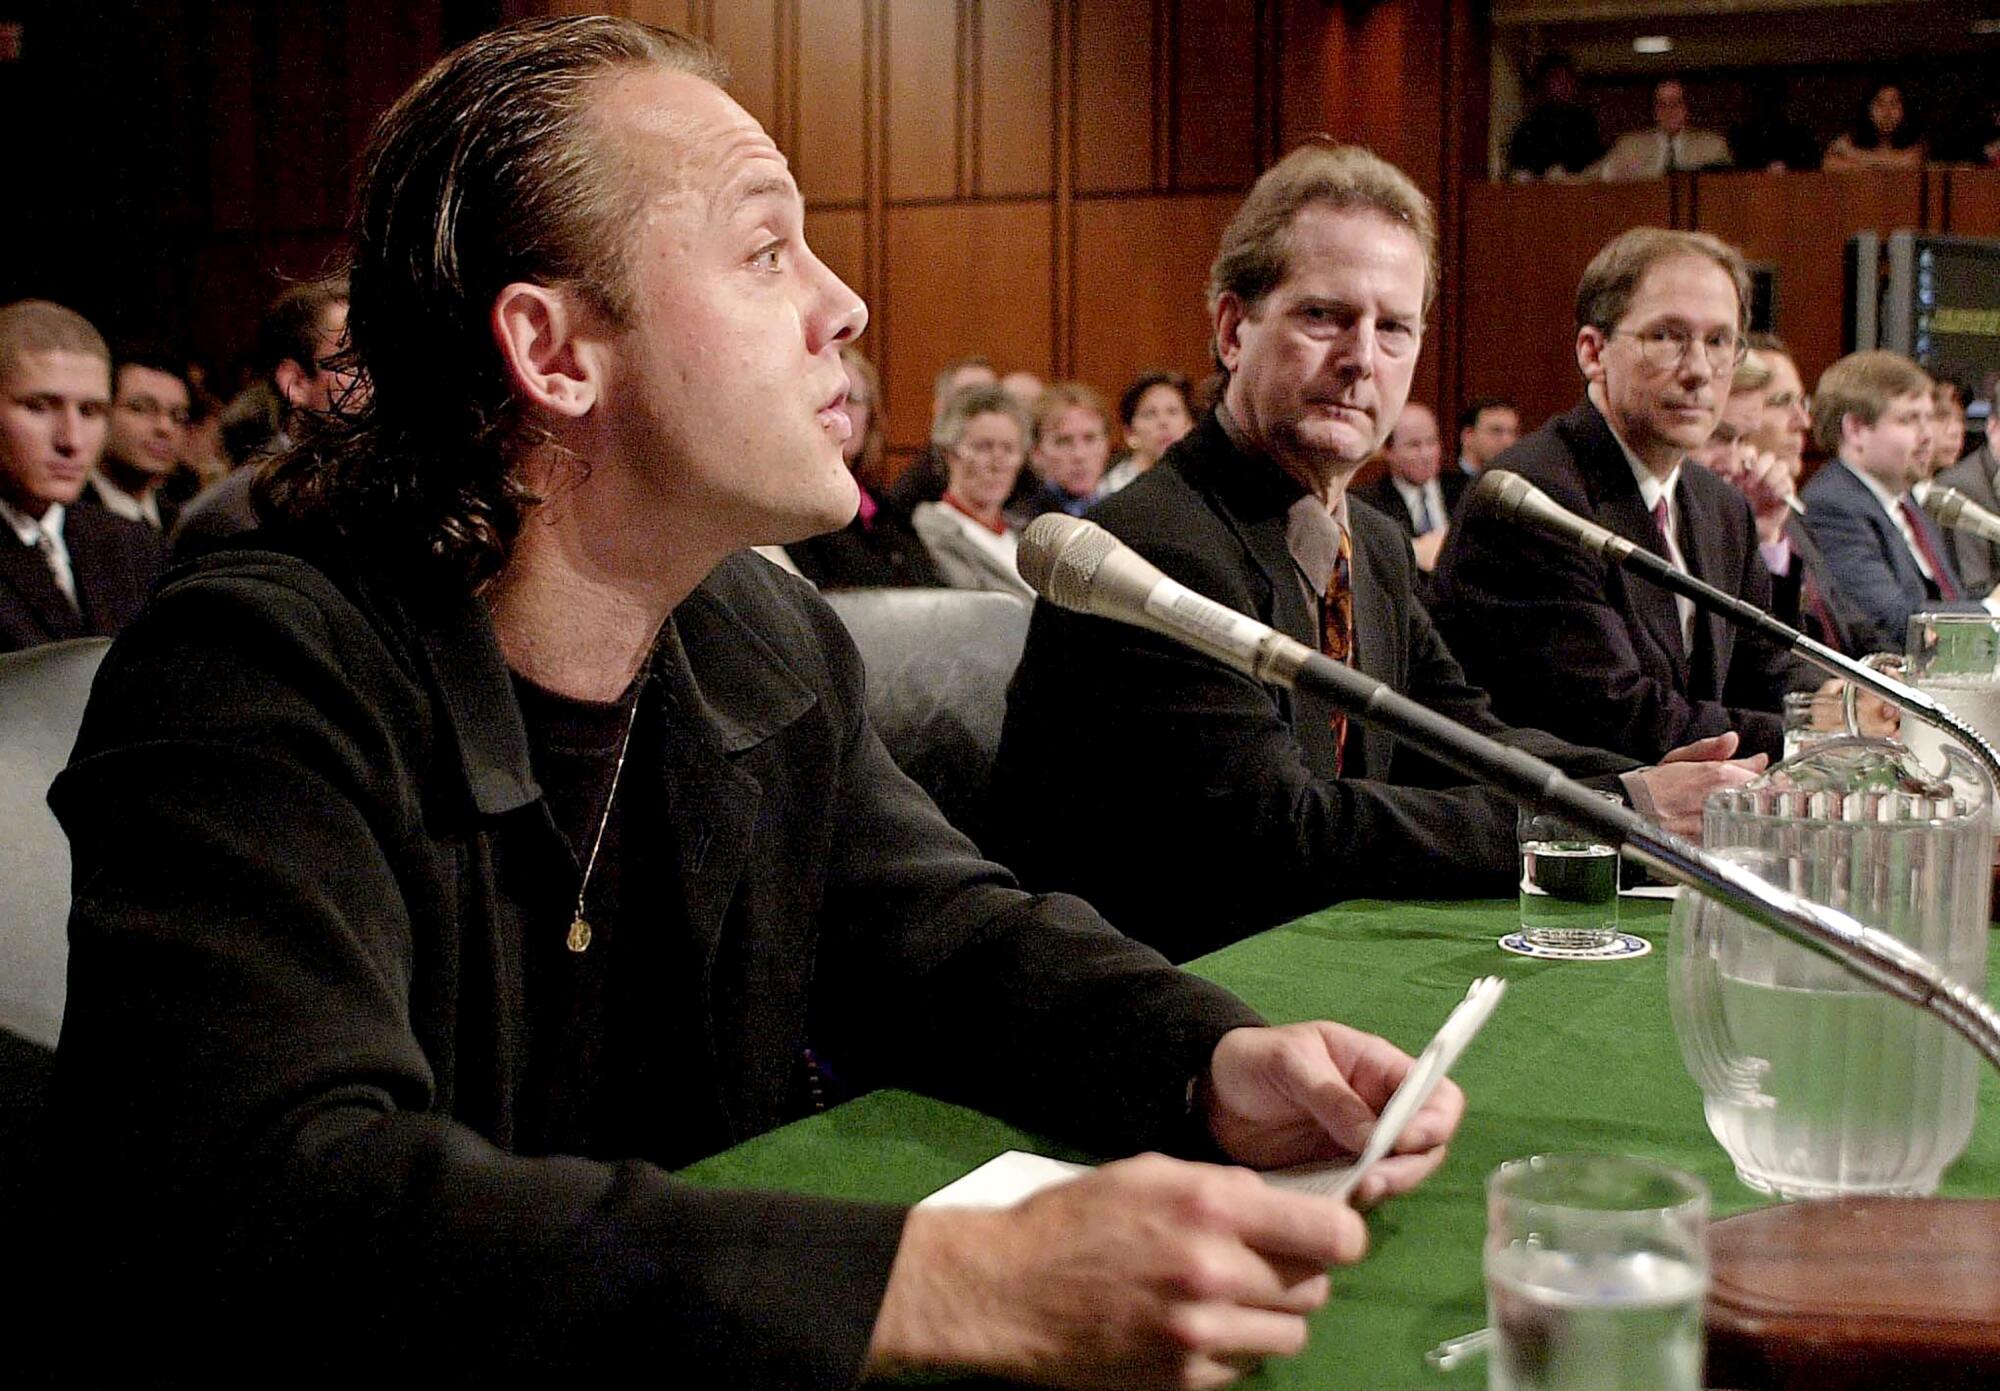 A man speaks into a microphone in a hearing while another man watches.